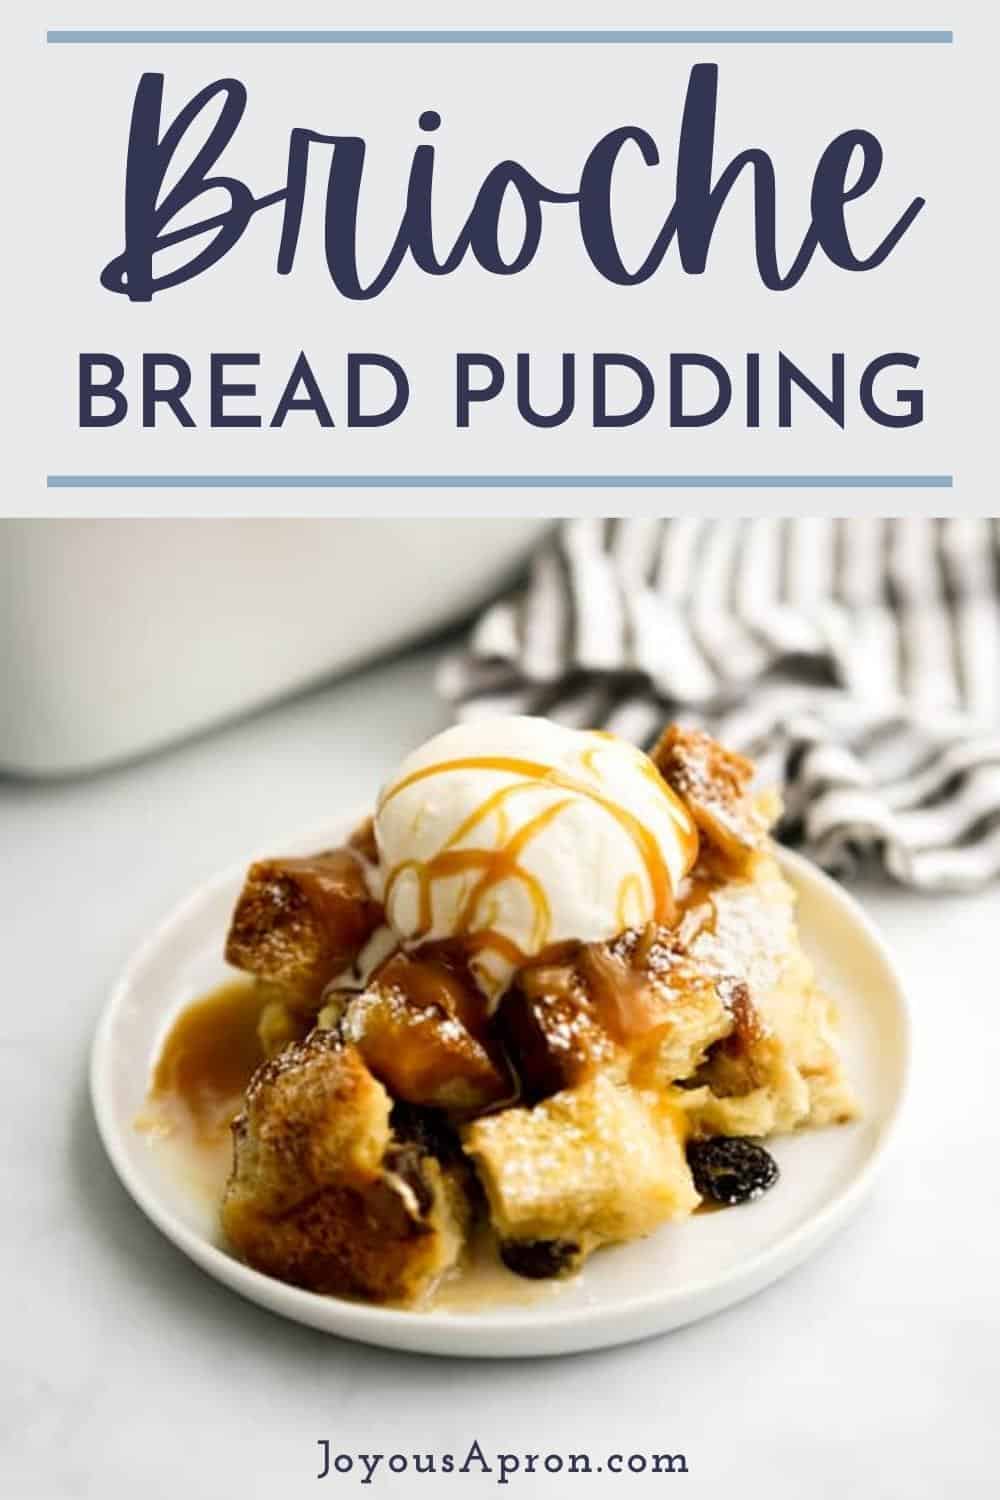 Brioche Bread Budding - Convert leftover brioche bread into this lovely Brioche Bread Pudding dessert. Best served topped with vanilla ice cream and drizzled with caramel sauce. via @joyousapron